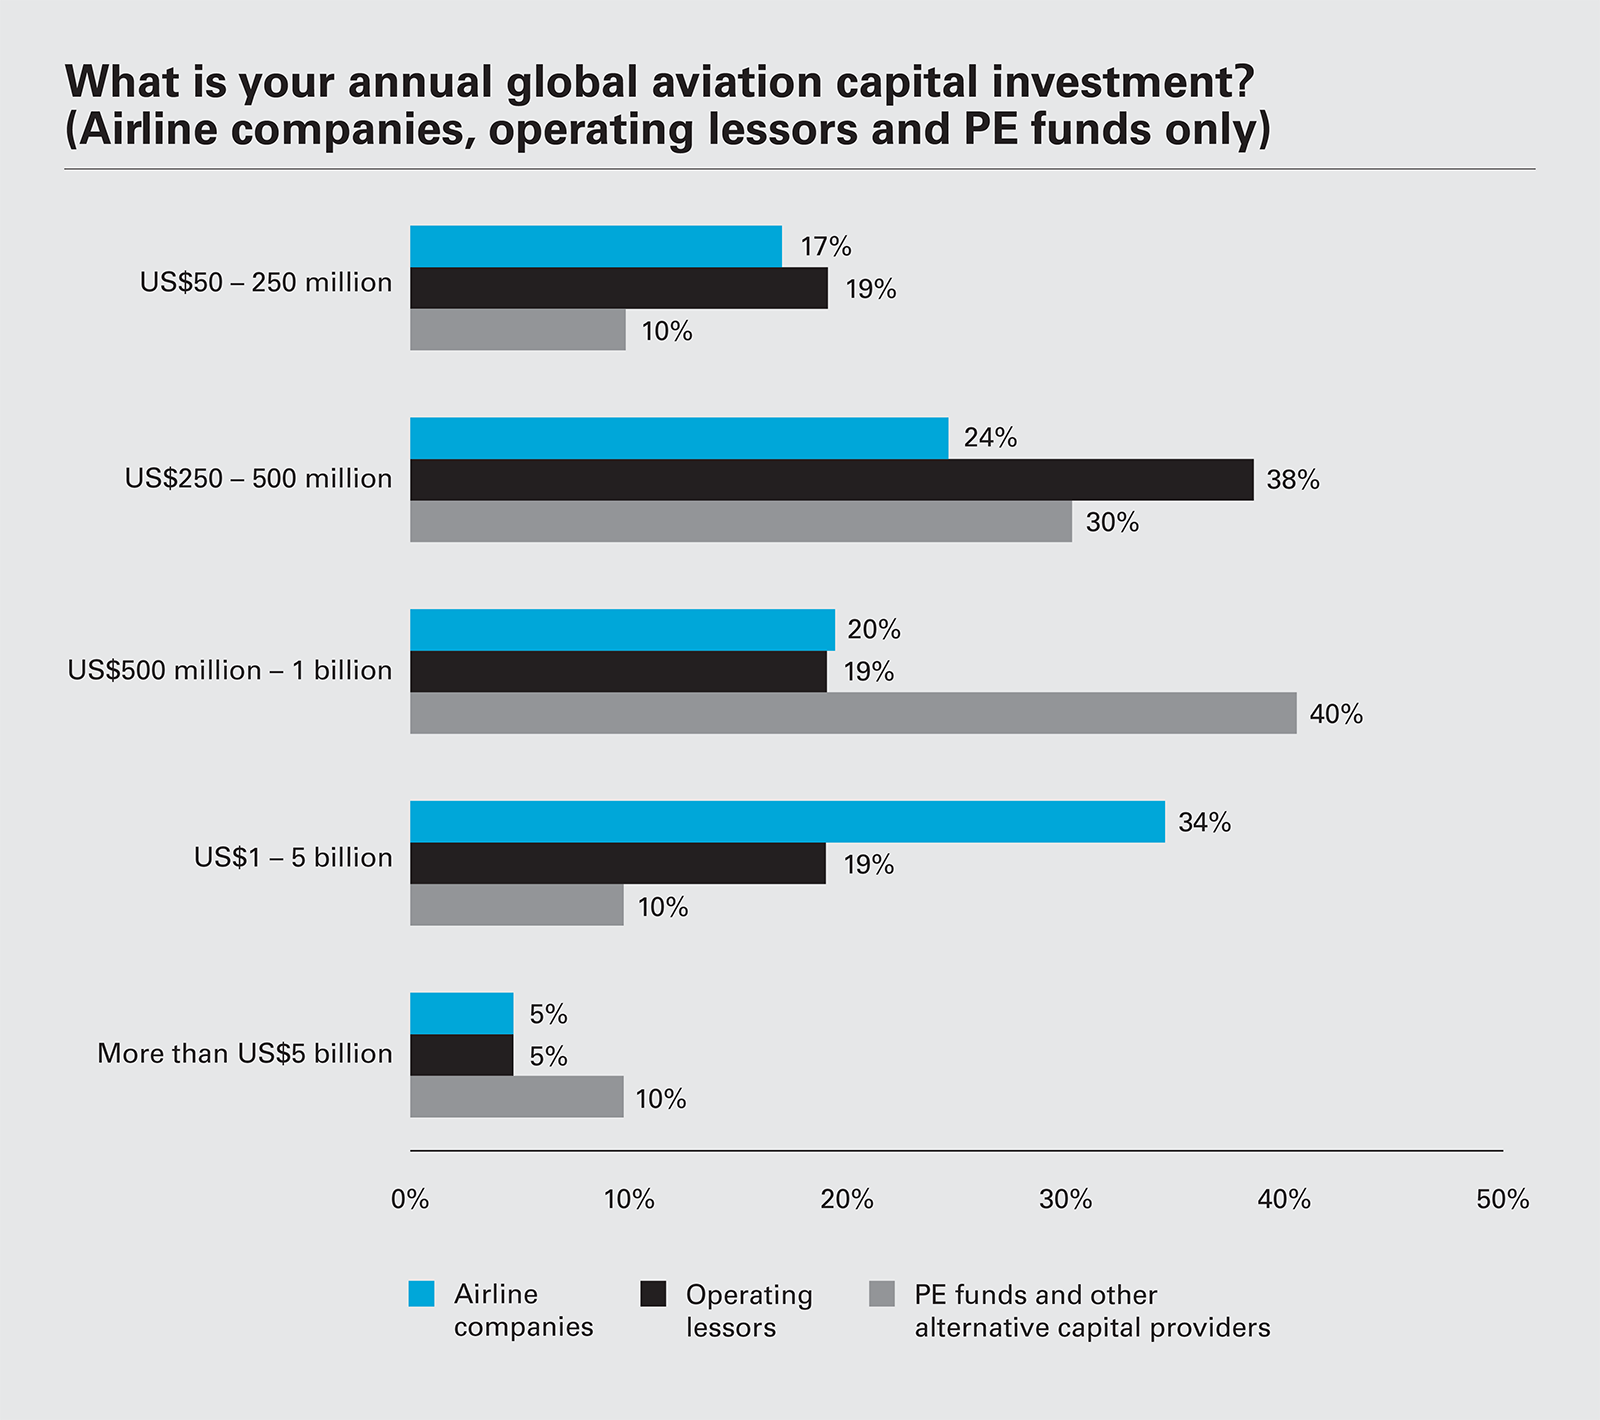 What is your annual global aviation capital investment? (Airline companies, operating lessors and PE funds only)